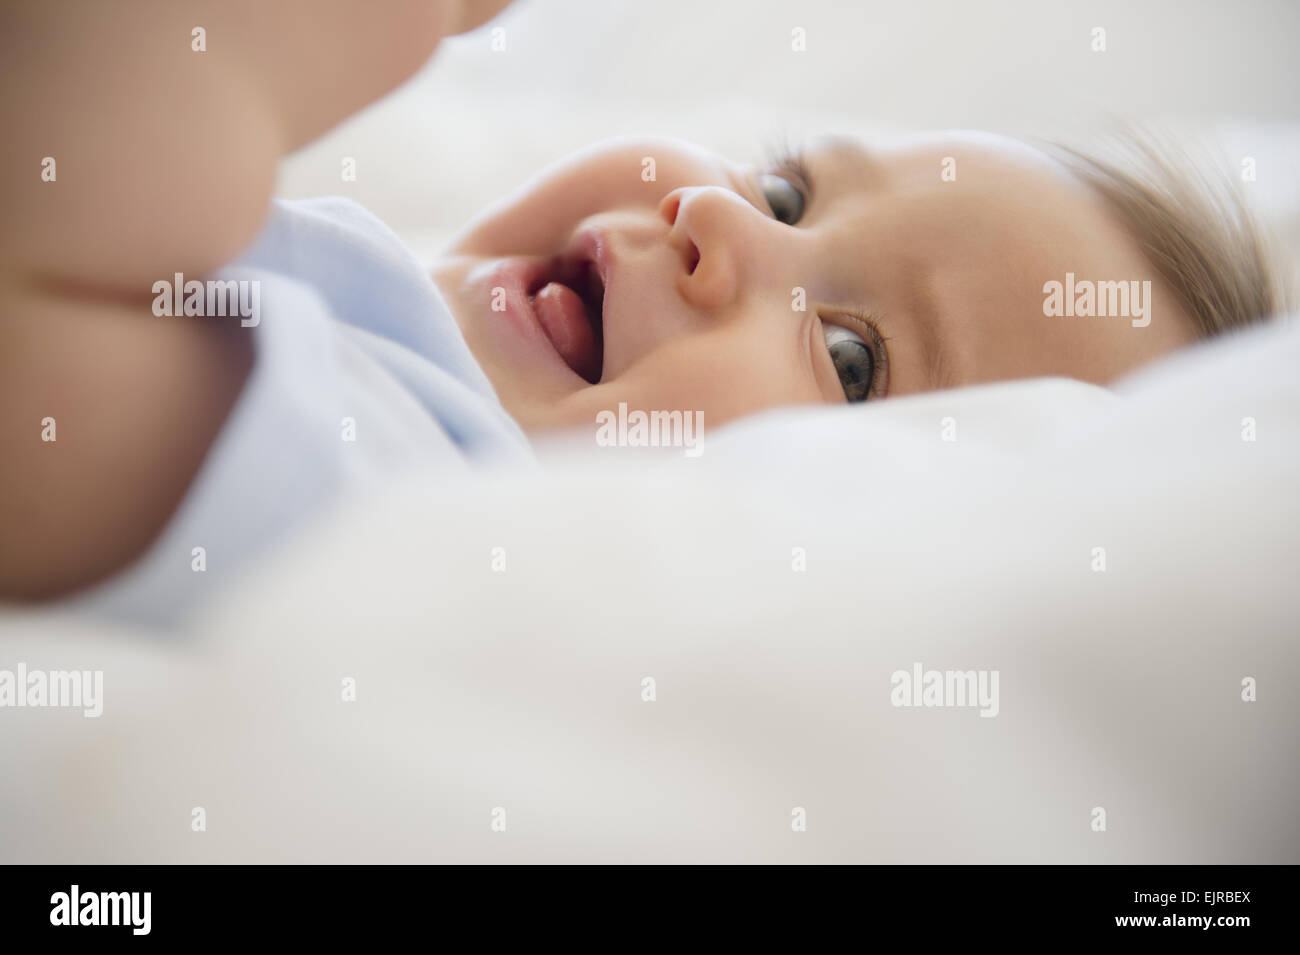 Close up of mixed race baby laying on bed Banque D'Images